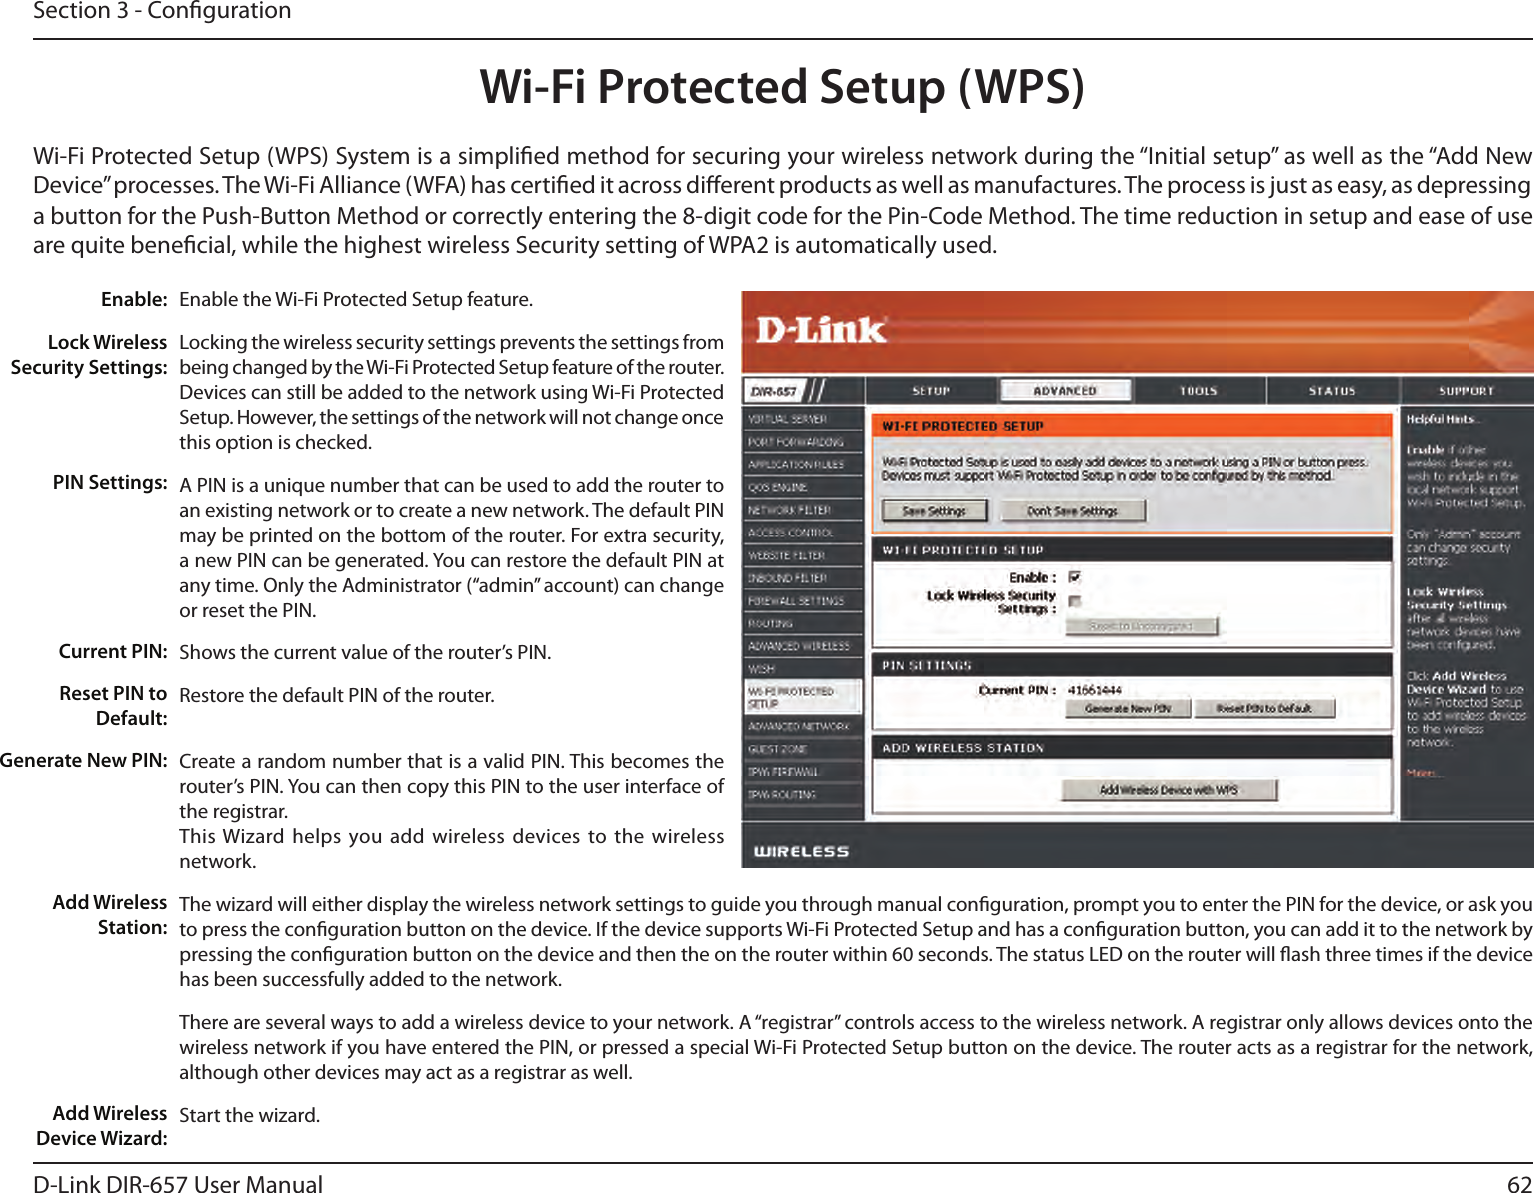 62D-Link DIR-657 User ManualSection 3 - CongurationWi-Fi Protected Setup (WPS)Enable the Wi-Fi Protected Setup feature. Locking the wireless security settings prevents the settings from being changed by the Wi-Fi Protected Setup feature of the router. Devices can still be added to the network using Wi-Fi Protected Setup. However, the settings of the network will not change once this option is checked.A PIN is a unique number that can be used to add the router to an existing network or to create a new network. The default PIN may be printed on the bottom of the router. For extra security, a new PIN can be generated. You can restore the default PIN at any time. Only the Administrator (“admin” account) can change or reset the PIN. Shows the current value of the router’s PIN. Restore the default PIN of the router. Create a random number that is a valid PIN. This becomes the router’s PIN. You can then copy this PIN to the user interface of the registrar.This Wizard helps  you add  wireless devices to the wireless network.The wizard will either display the wireless network settings to guide you through manual conguration, prompt you to enter the PIN for the device, or ask you to press the conguration button on the device. If the device supports Wi-Fi Protected Setup and has a conguration button, you can add it to the network by pressing the conguration button on the device and then the on the router within 60 seconds. The status LED on the router will ash three times if the device has been successfully added to the network.There are several ways to add a wireless device to your network. A “registrar” controls access to the wireless network. A registrar only allows devices onto the wireless network if you have entered the PIN, or pressed a special Wi-Fi Protected Setup button on the device. The router acts as a registrar for the network, although other devices may act as a registrar as well.Start the wizard.Enable:Lock Wireless Security Settings:PIN Settings:Current PIN:Reset PIN to Default:Generate New PIN:Add Wireless Station:Add Wireless Device Wizard:Wi-Fi Protected Setup (WPS) System is a simplied method for securing your wireless network during the “Initial setup” as well as the “Add New Device” processes. The Wi-Fi Alliance (WFA) has certied it across dierent products as well as manufactures. The process is just as easy, as depressing a button for the Push-Button Method or correctly entering the 8-digit code for the Pin-Code Method. The time reduction in setup and ease of use are quite benecial, while the highest wireless Security setting of WPA2 is automatically used.